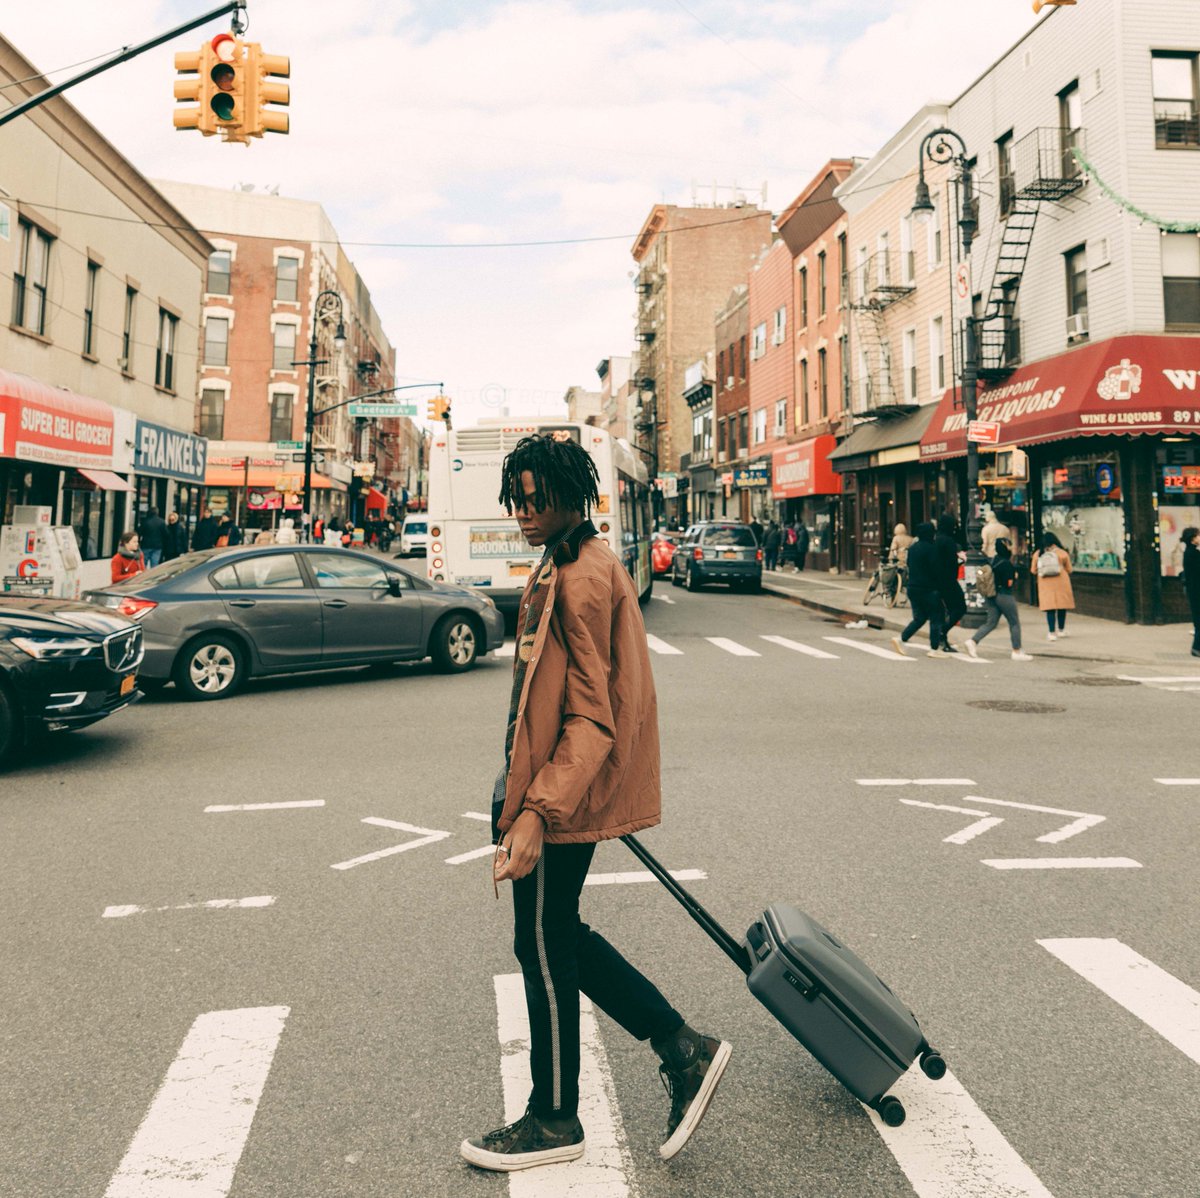 Keep calm and travel on, like our friend @olliesjournal in NYC. #WellTravelled